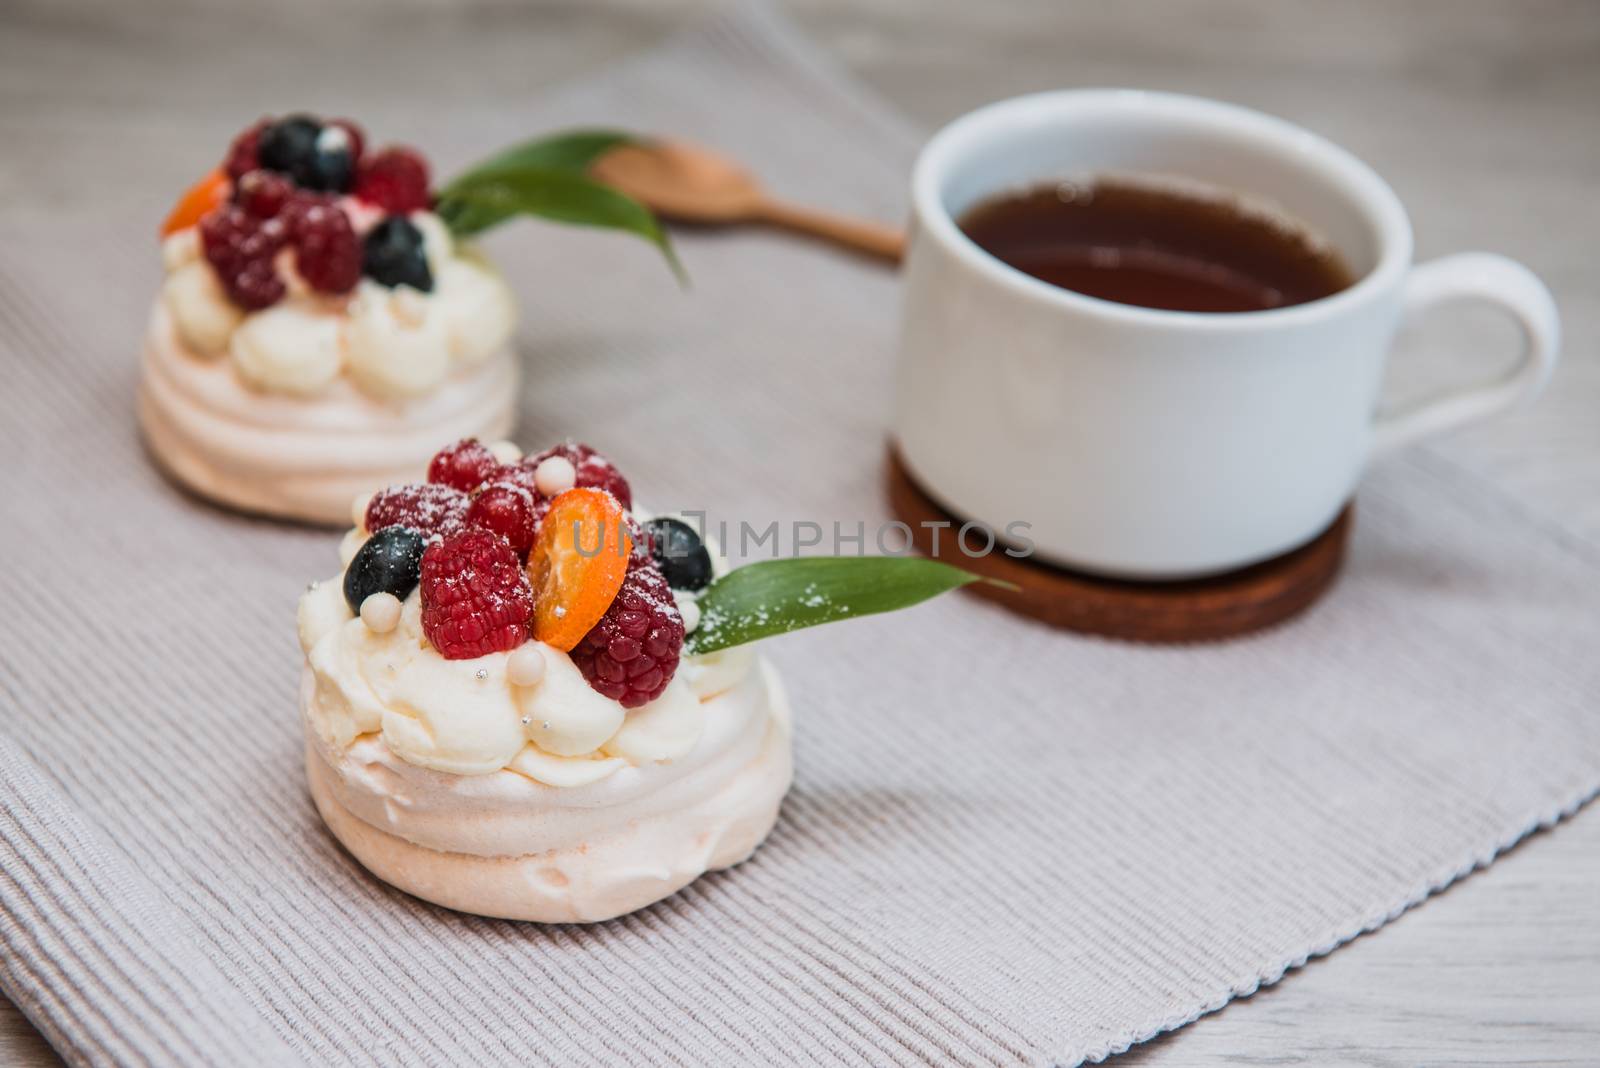 Pavlova meringue desert cake with cream, small fruits and cup of tea